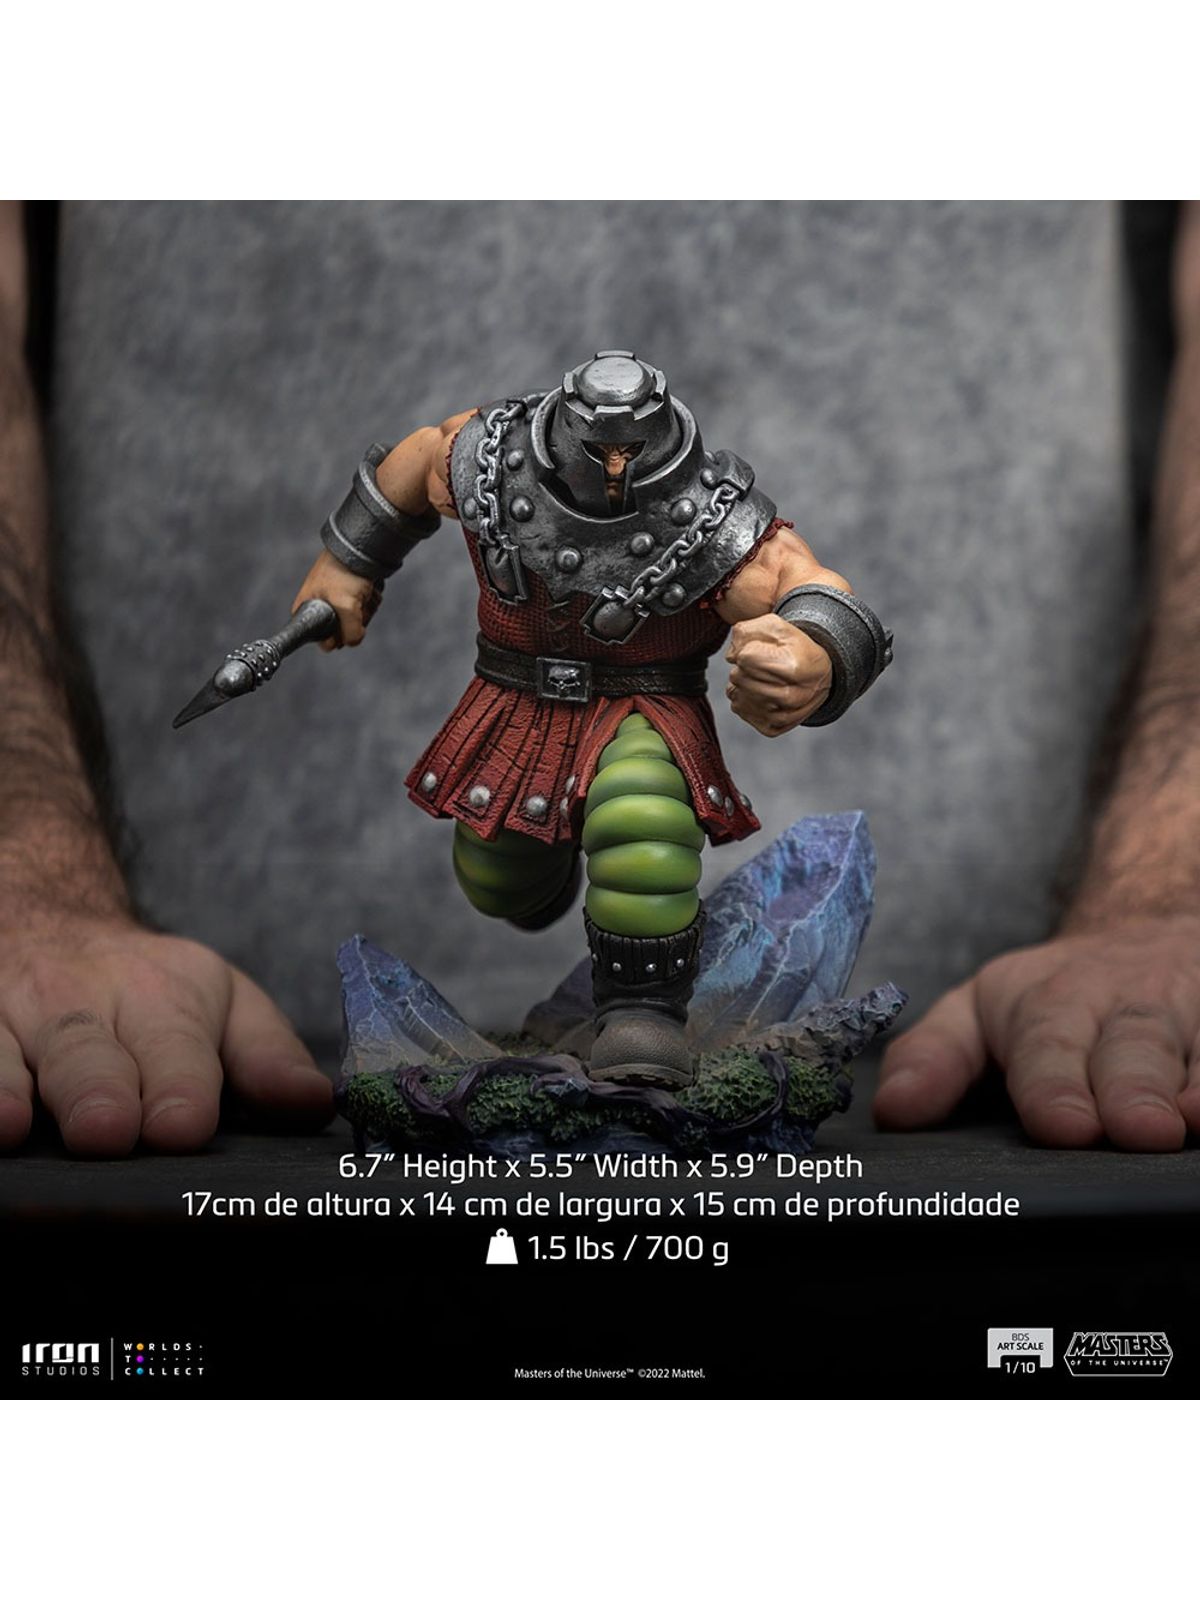 [PRE-ORDER] Iron Studios Masters of the Universe - Ram-Man (BDS Art Scale 1/10)